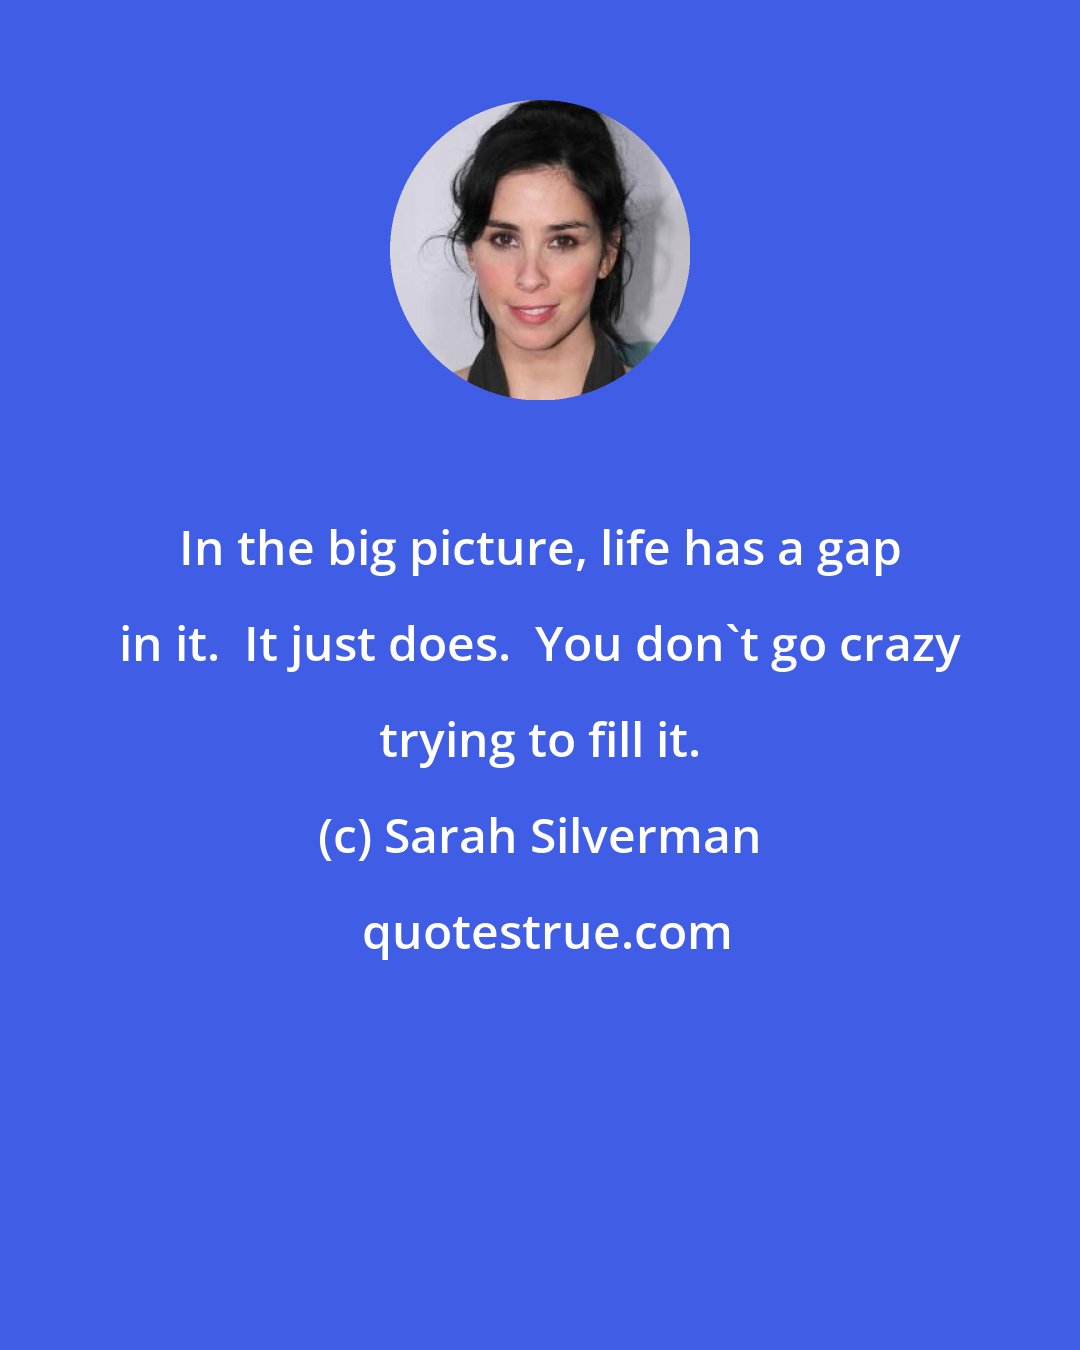 Sarah Silverman: In the big picture, life has a gap in it.  It just does.  You don't go crazy trying to fill it.